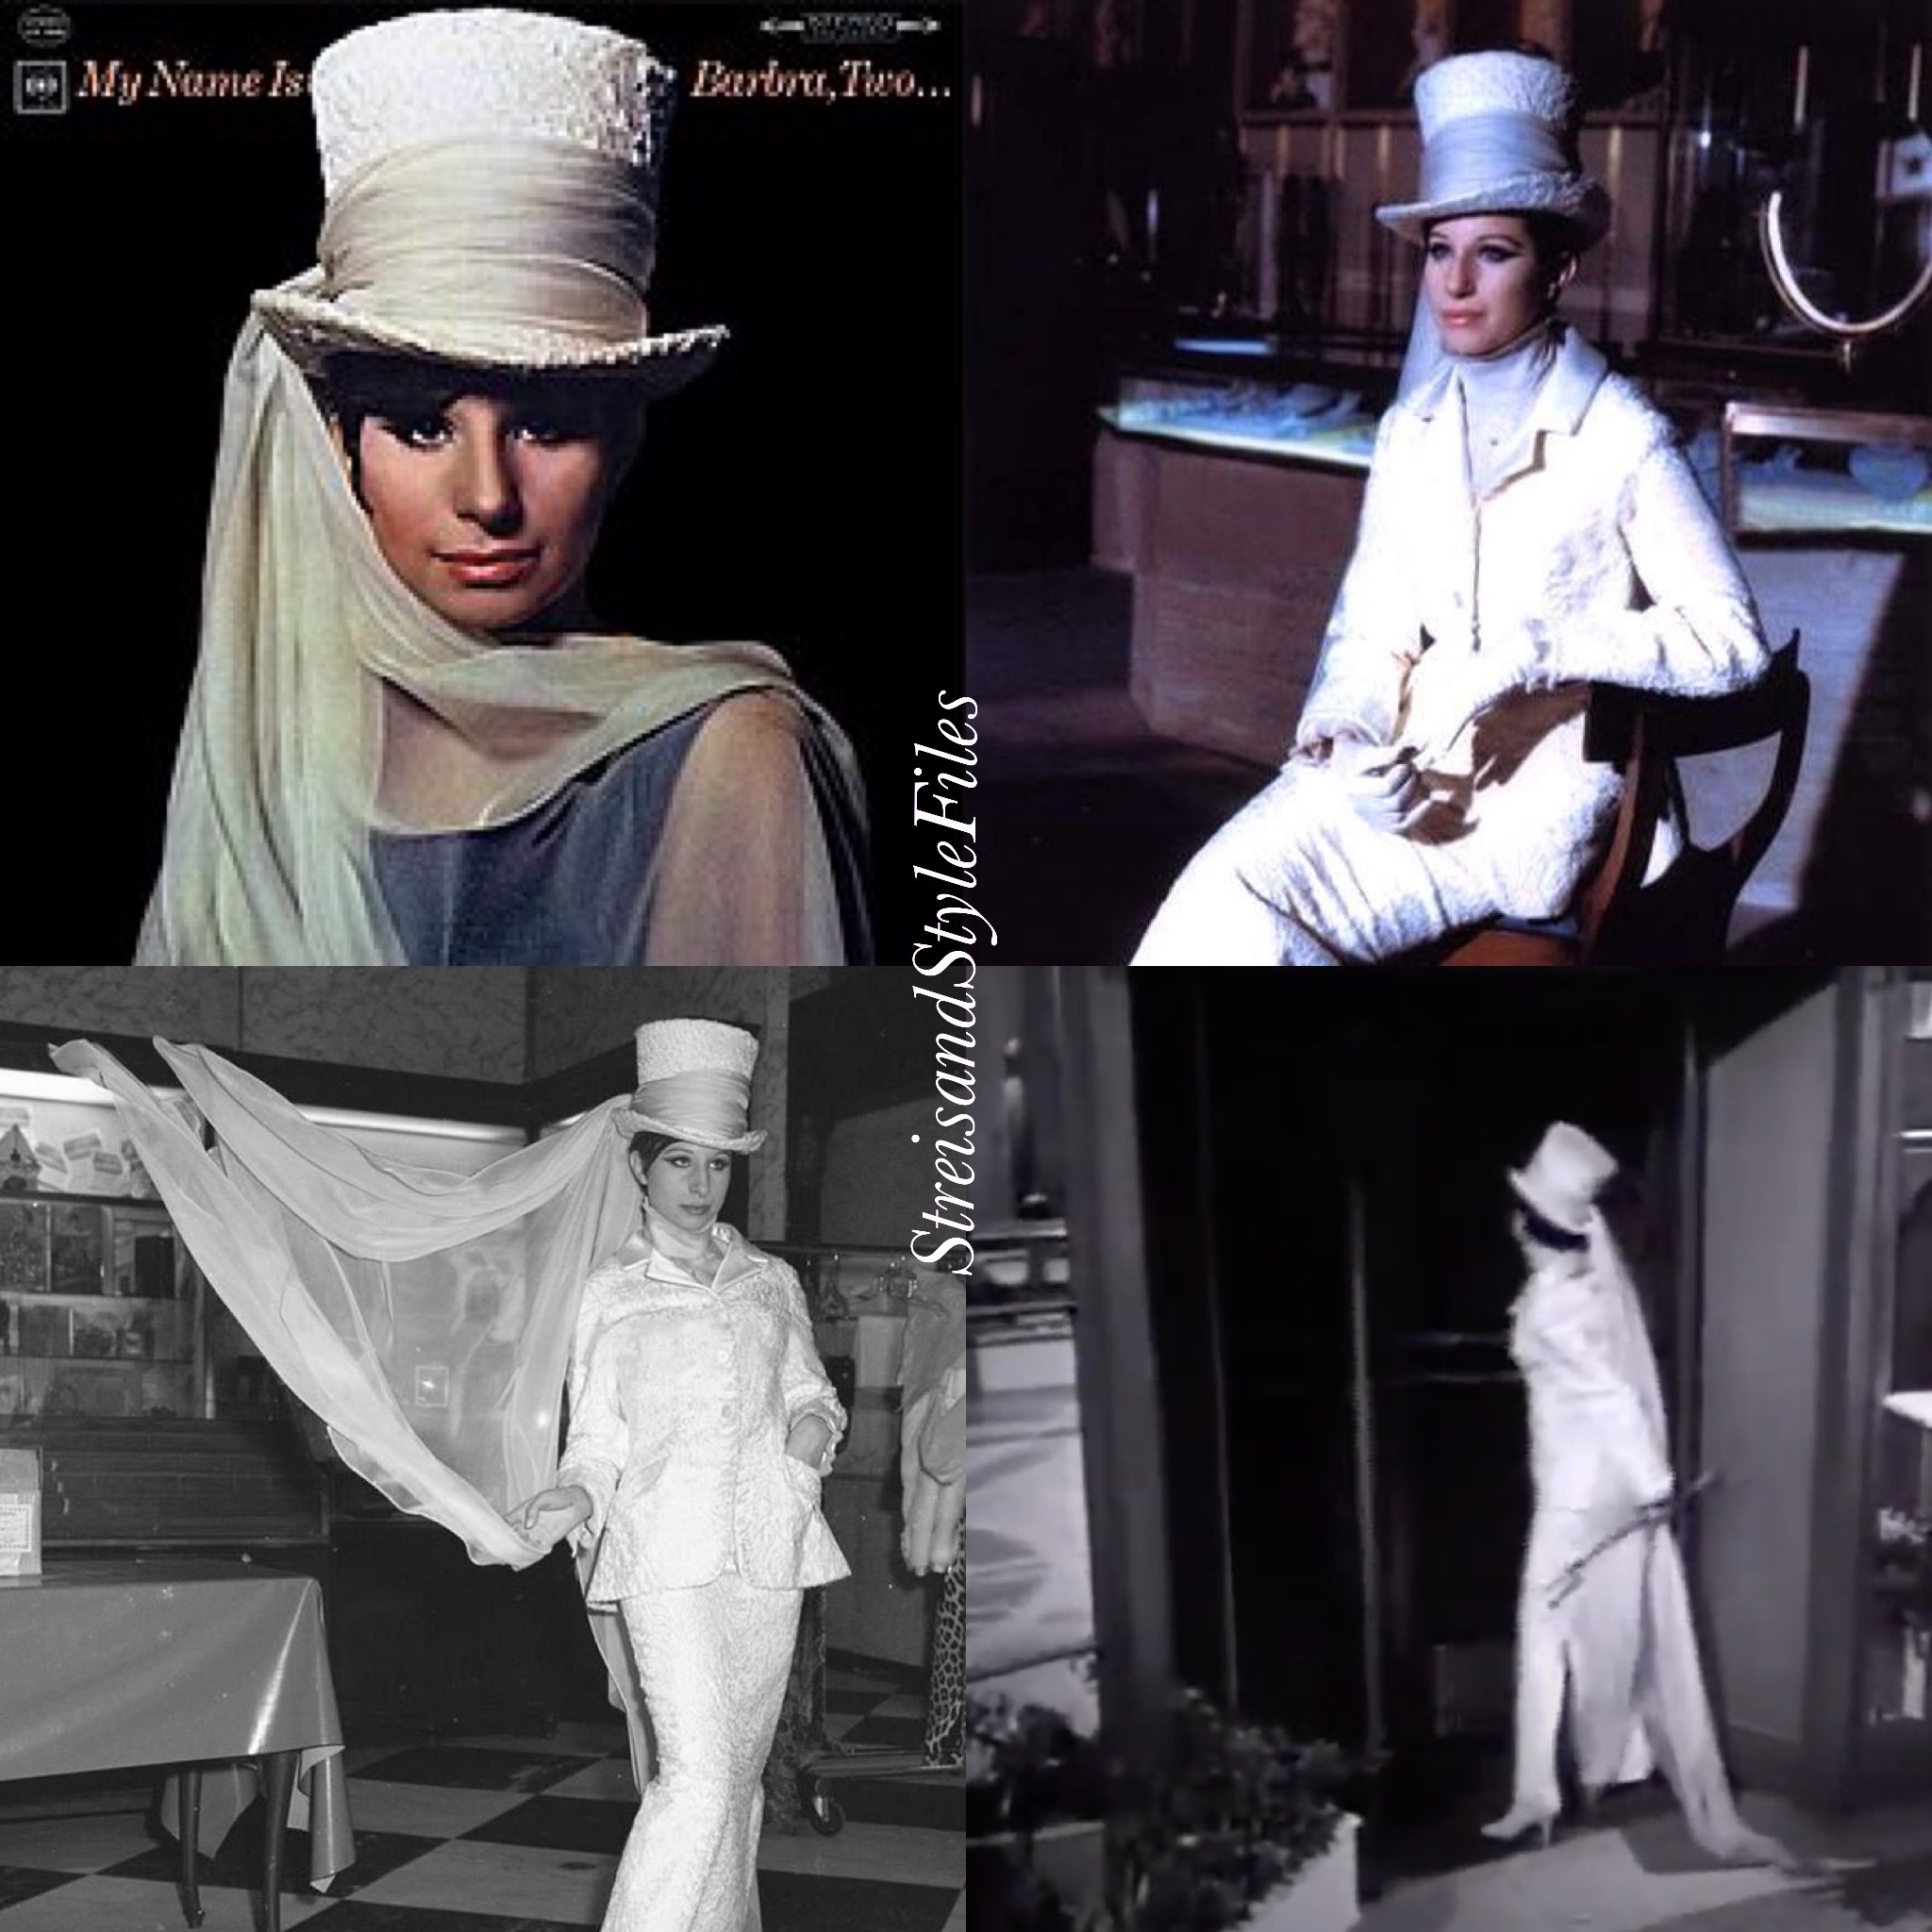 “My Name Is Barbra, Two…” album cover and T.V. special hat by Halston